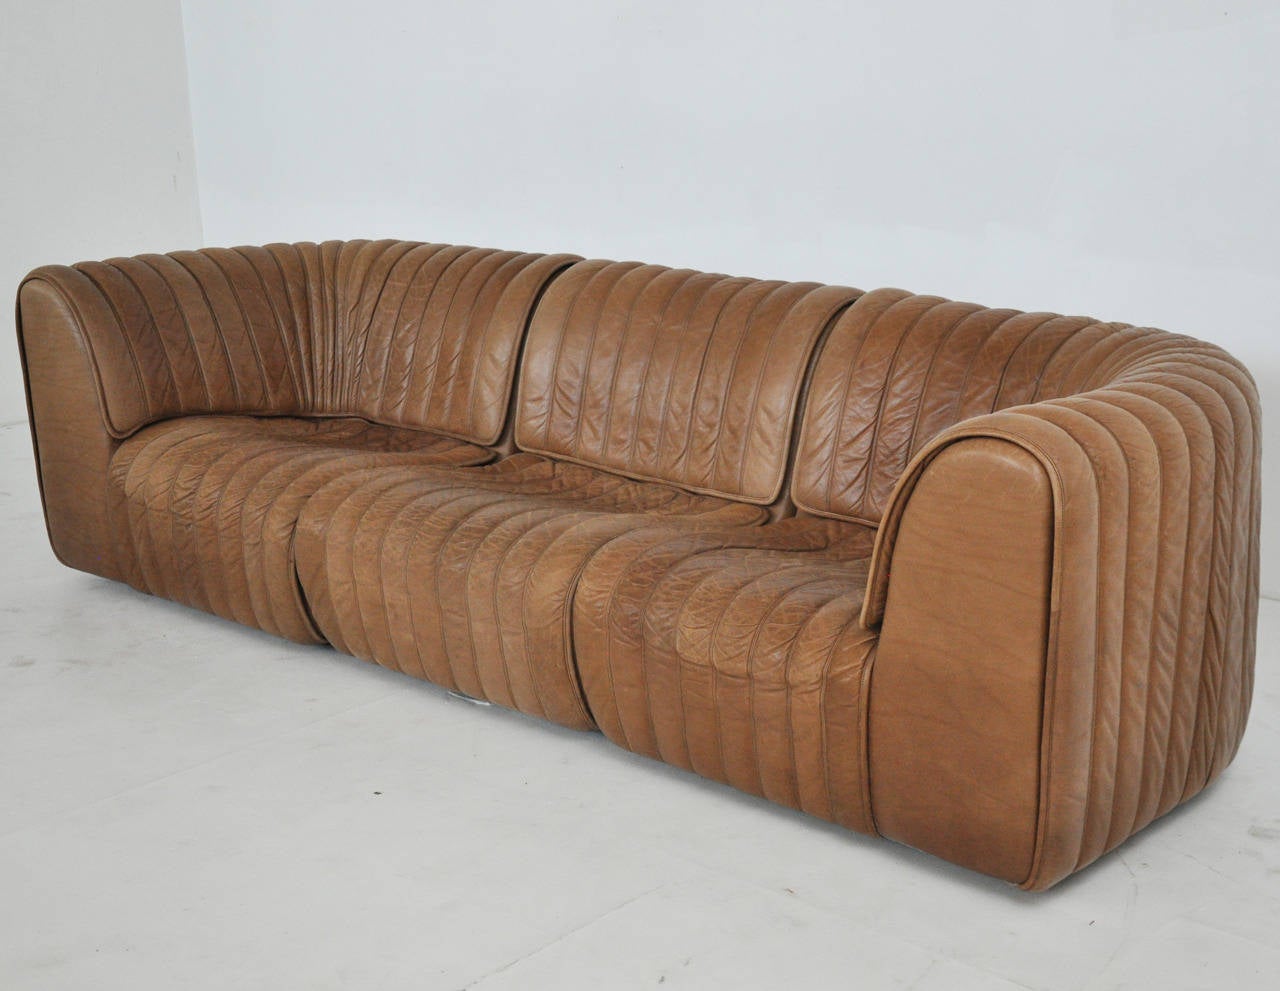 Natural brown leather sofa.  3 piece sectional.  Produced by De Sede in Switzerland and distributed by Stendig.  Rare model DS-22.